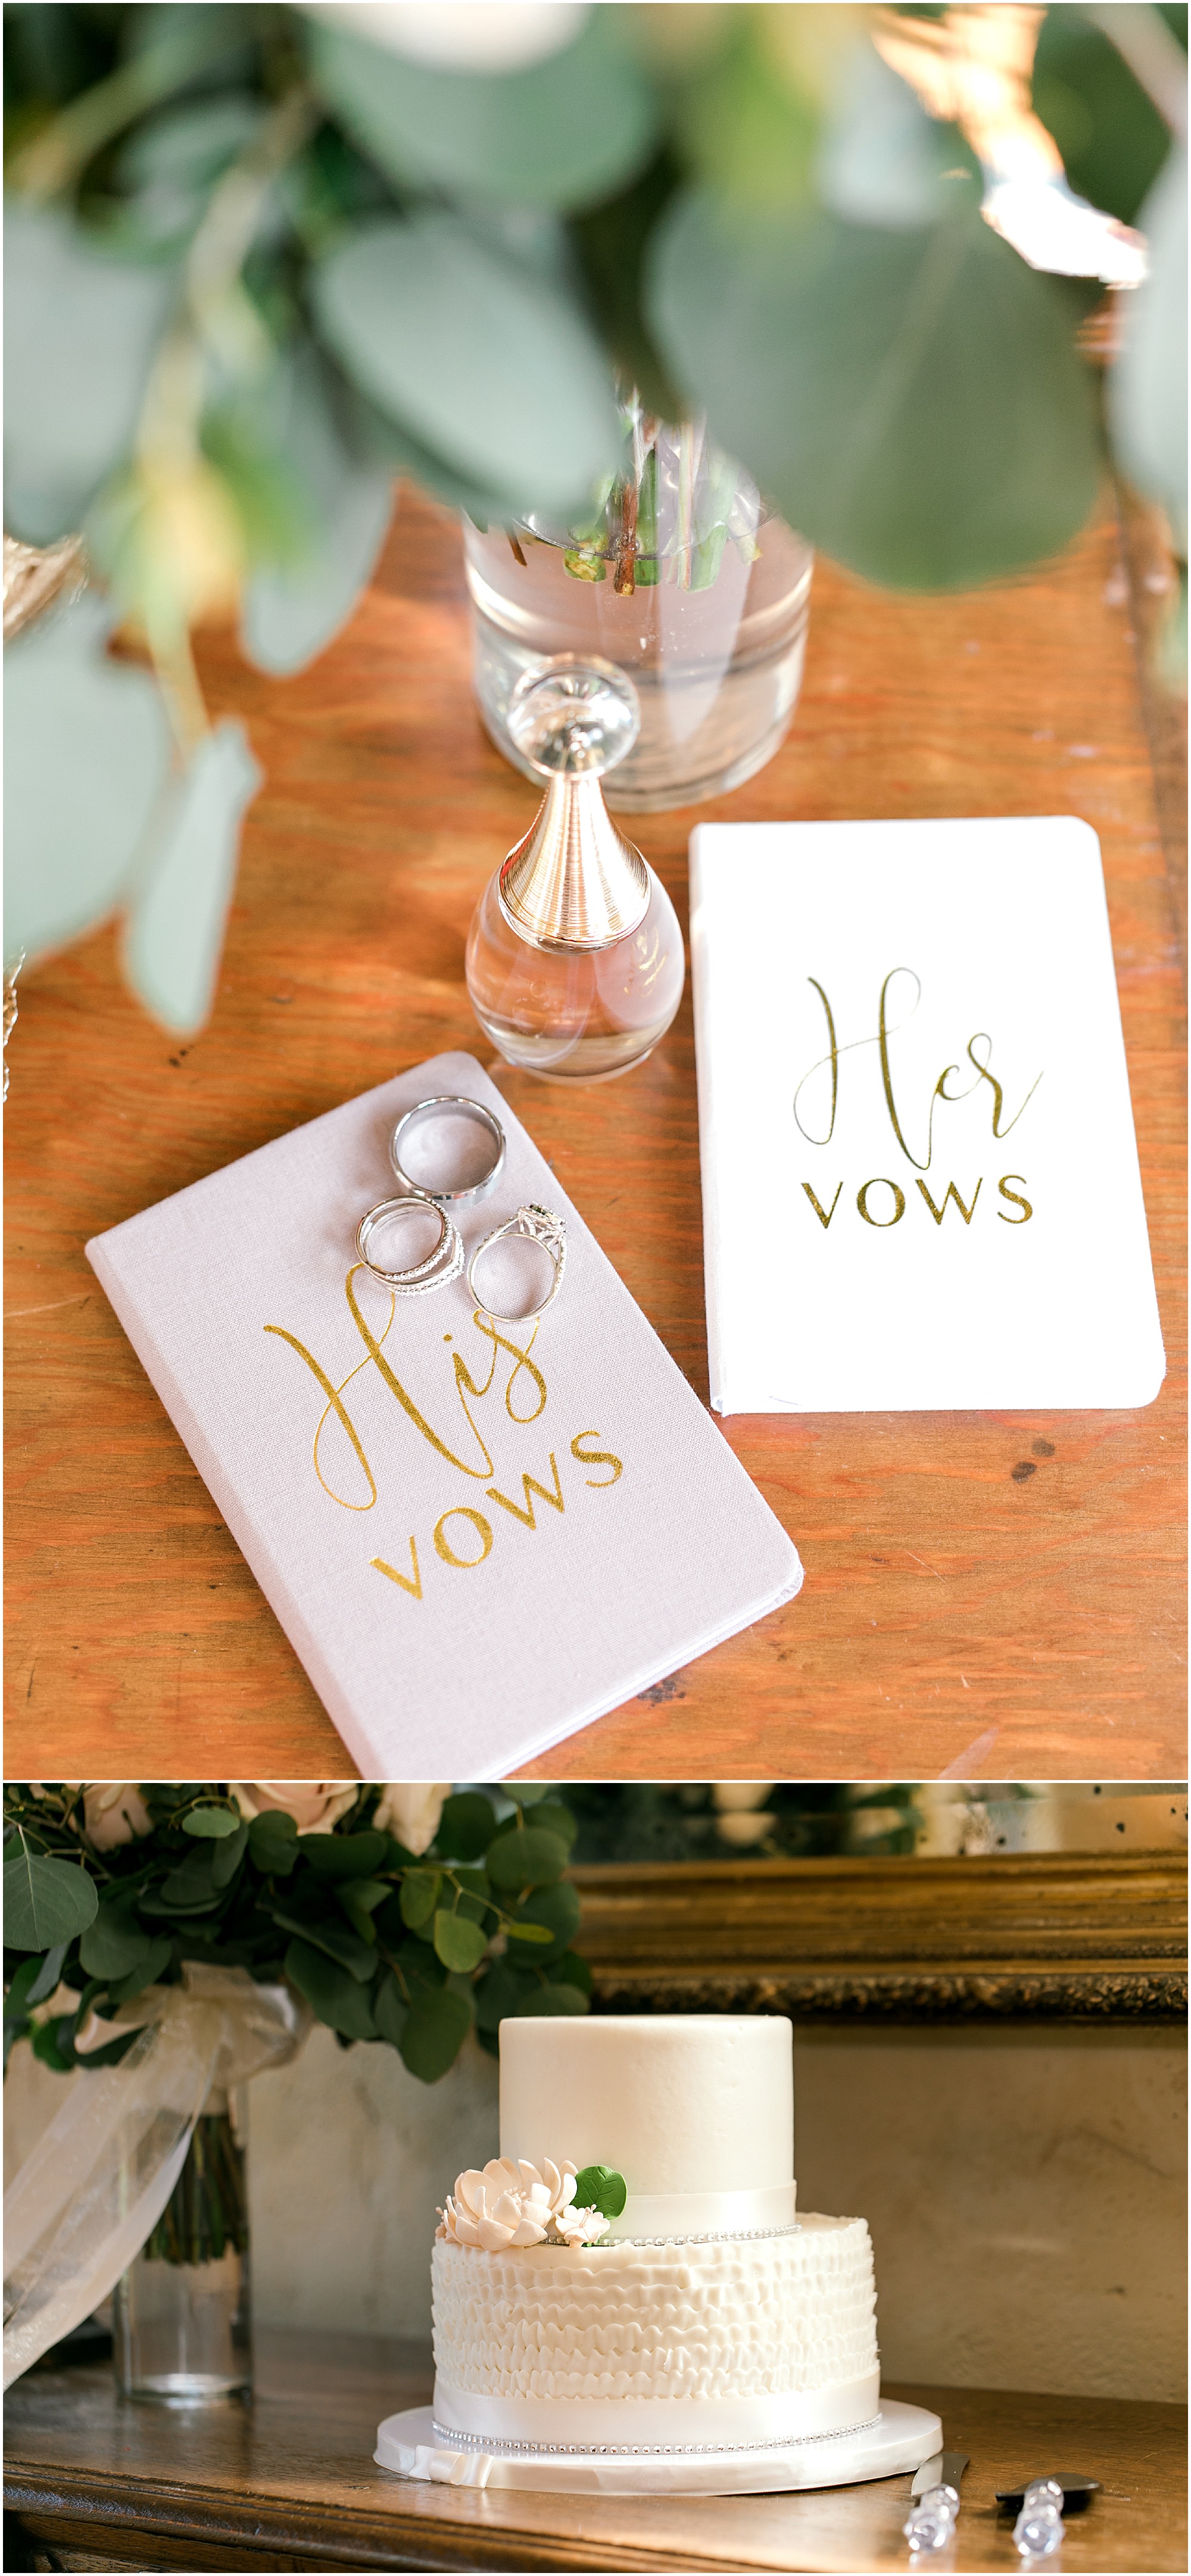 Detailed photos of his and hers vows along with a two tiered white cake